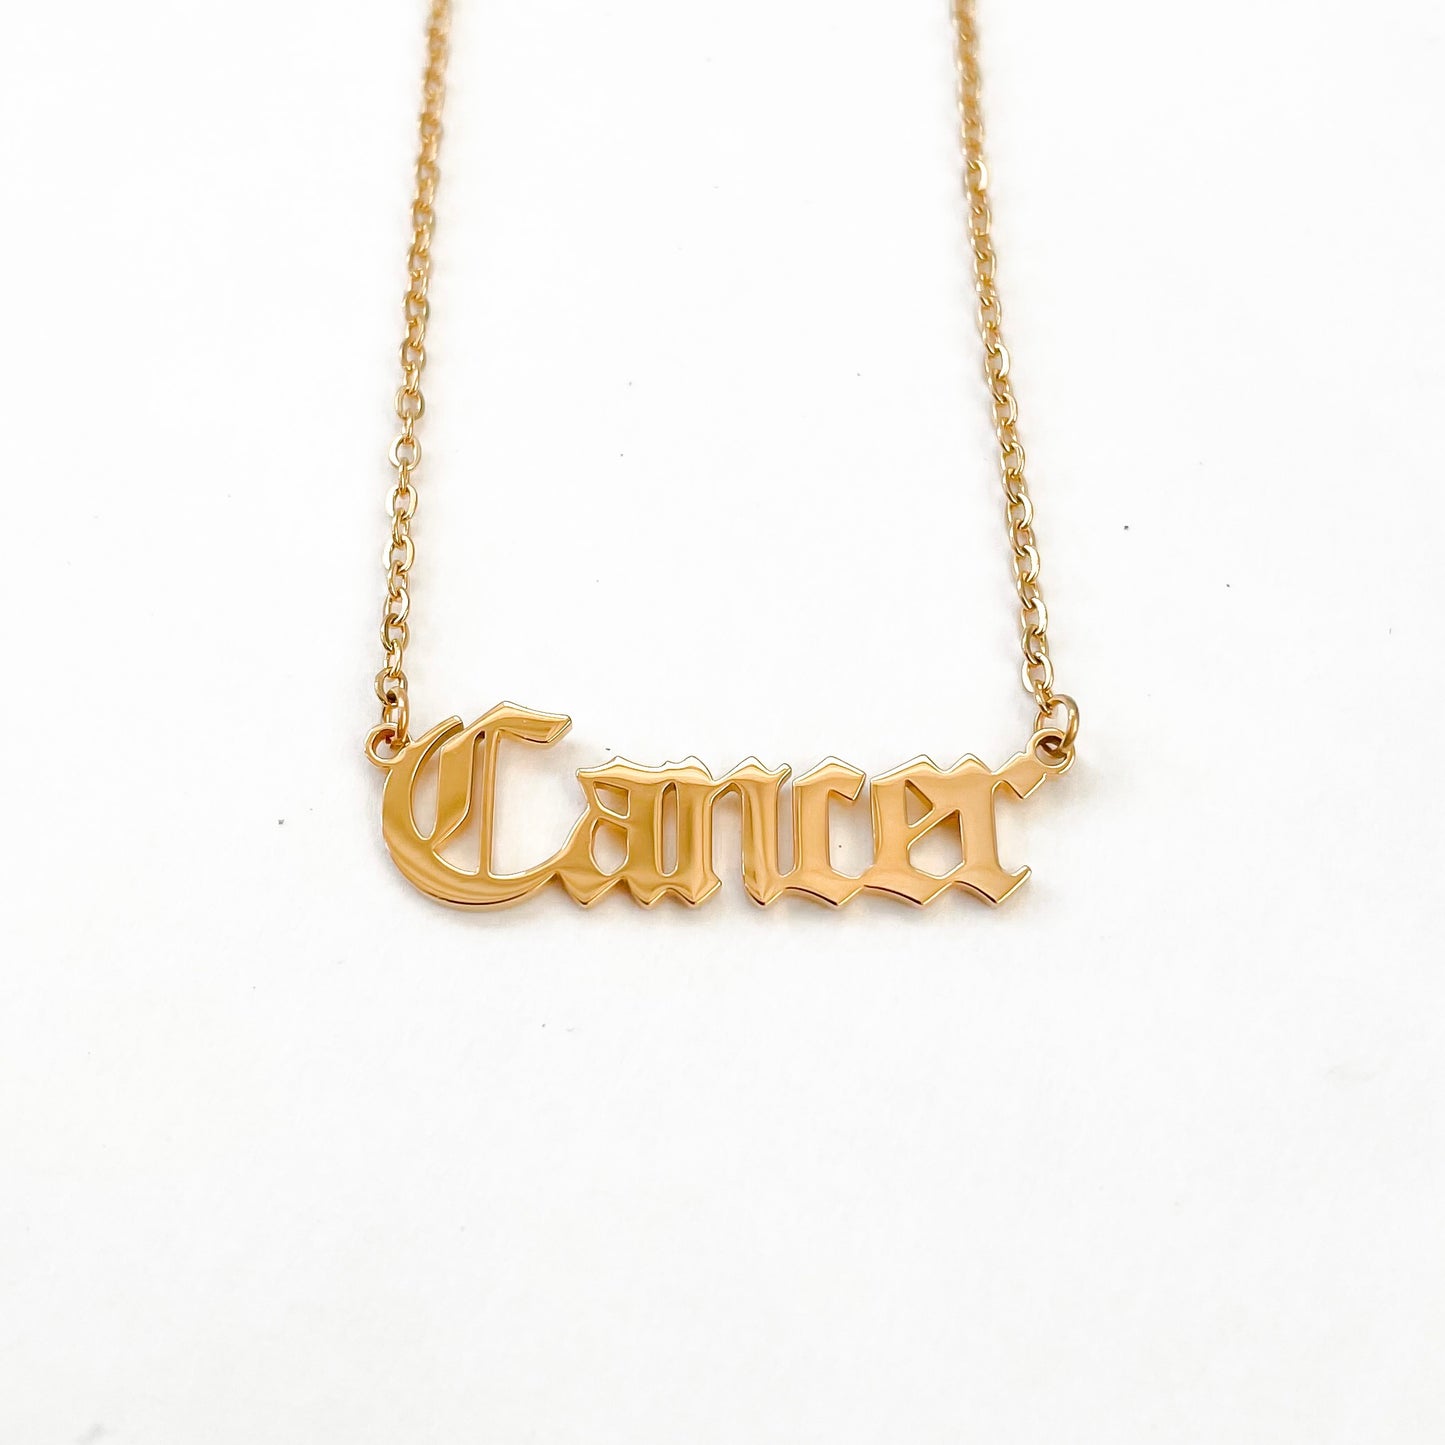 Cancer Necklace in Gold